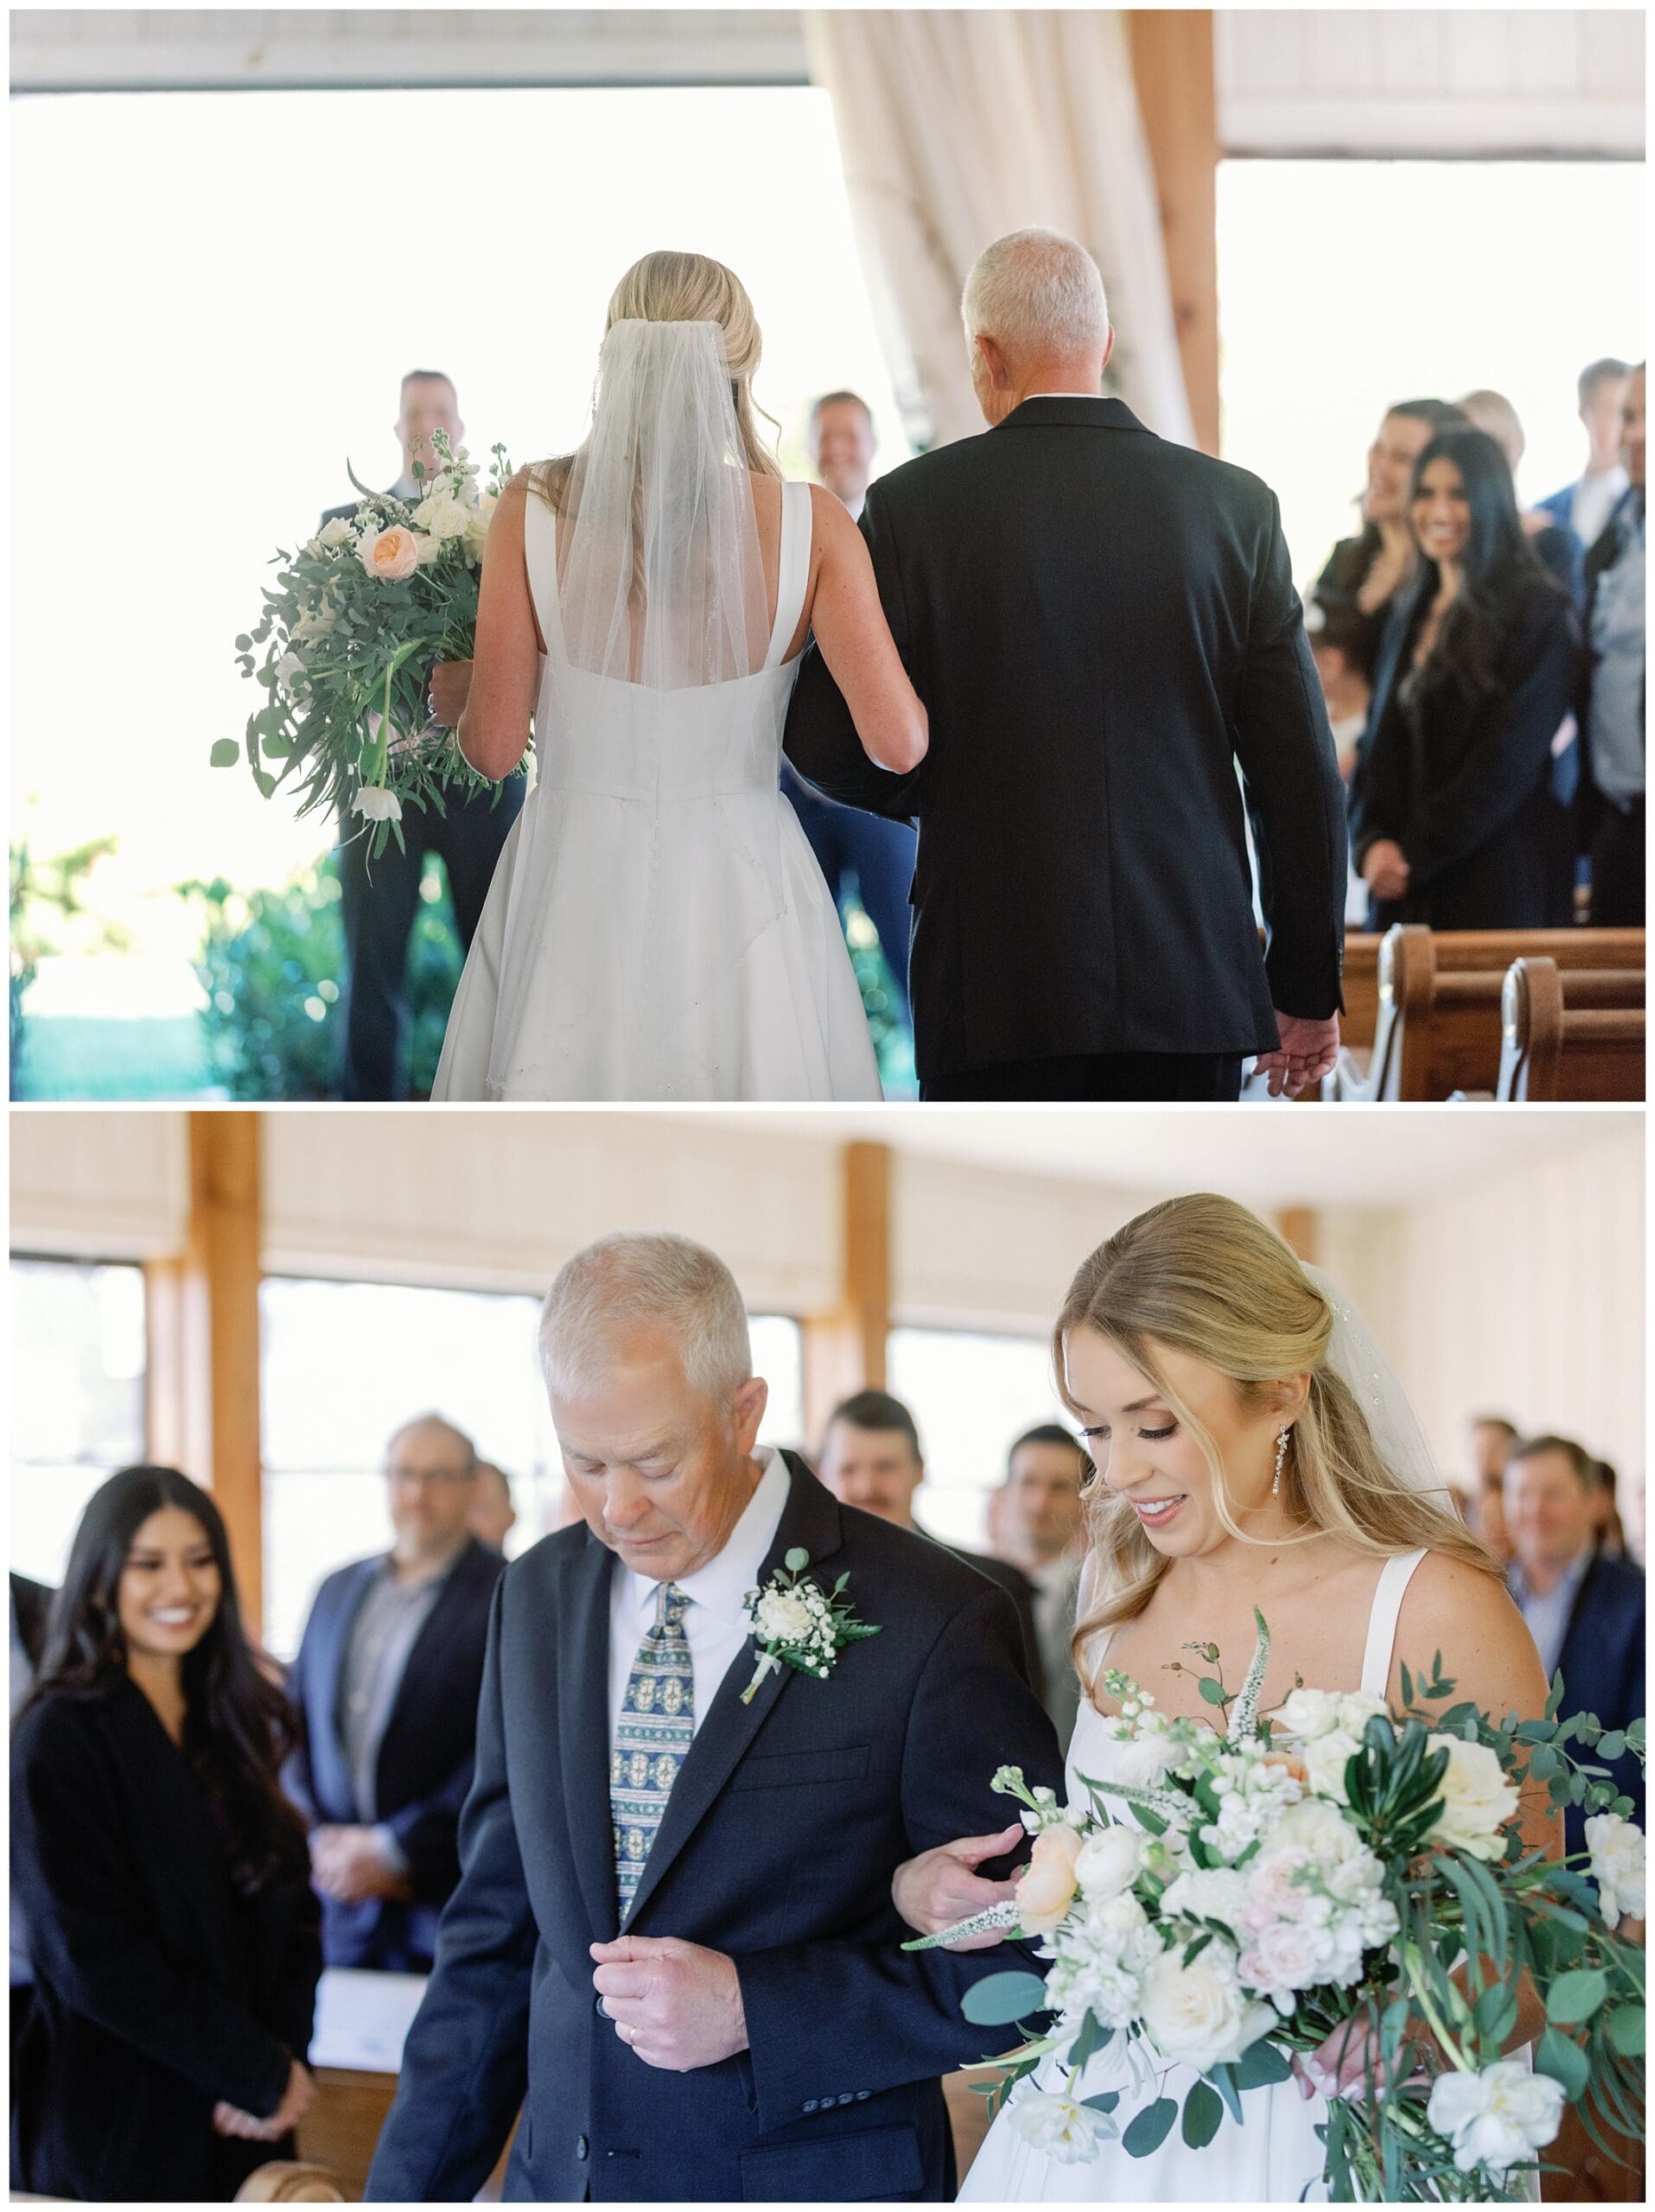 A bride walks down the aisle with her father during her dream wedding at chestnut ridge